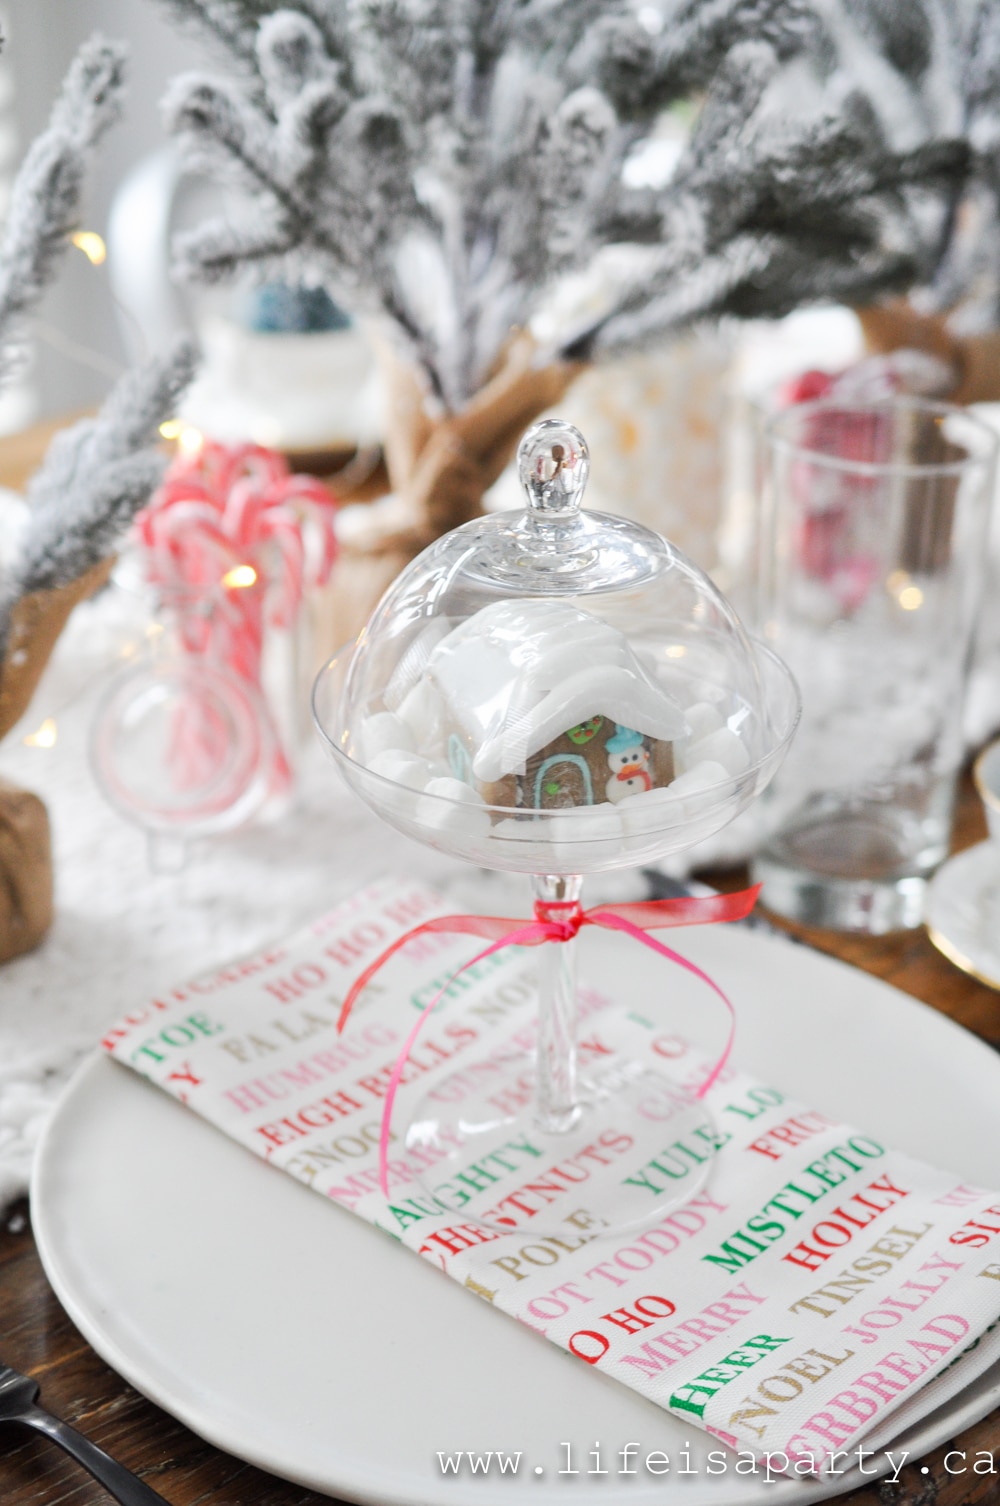 Thrift Store Christmas Table and Thrift Store Tips: beautiful Christmas table put together with thrift store finds, and 9 tips for thrifting.